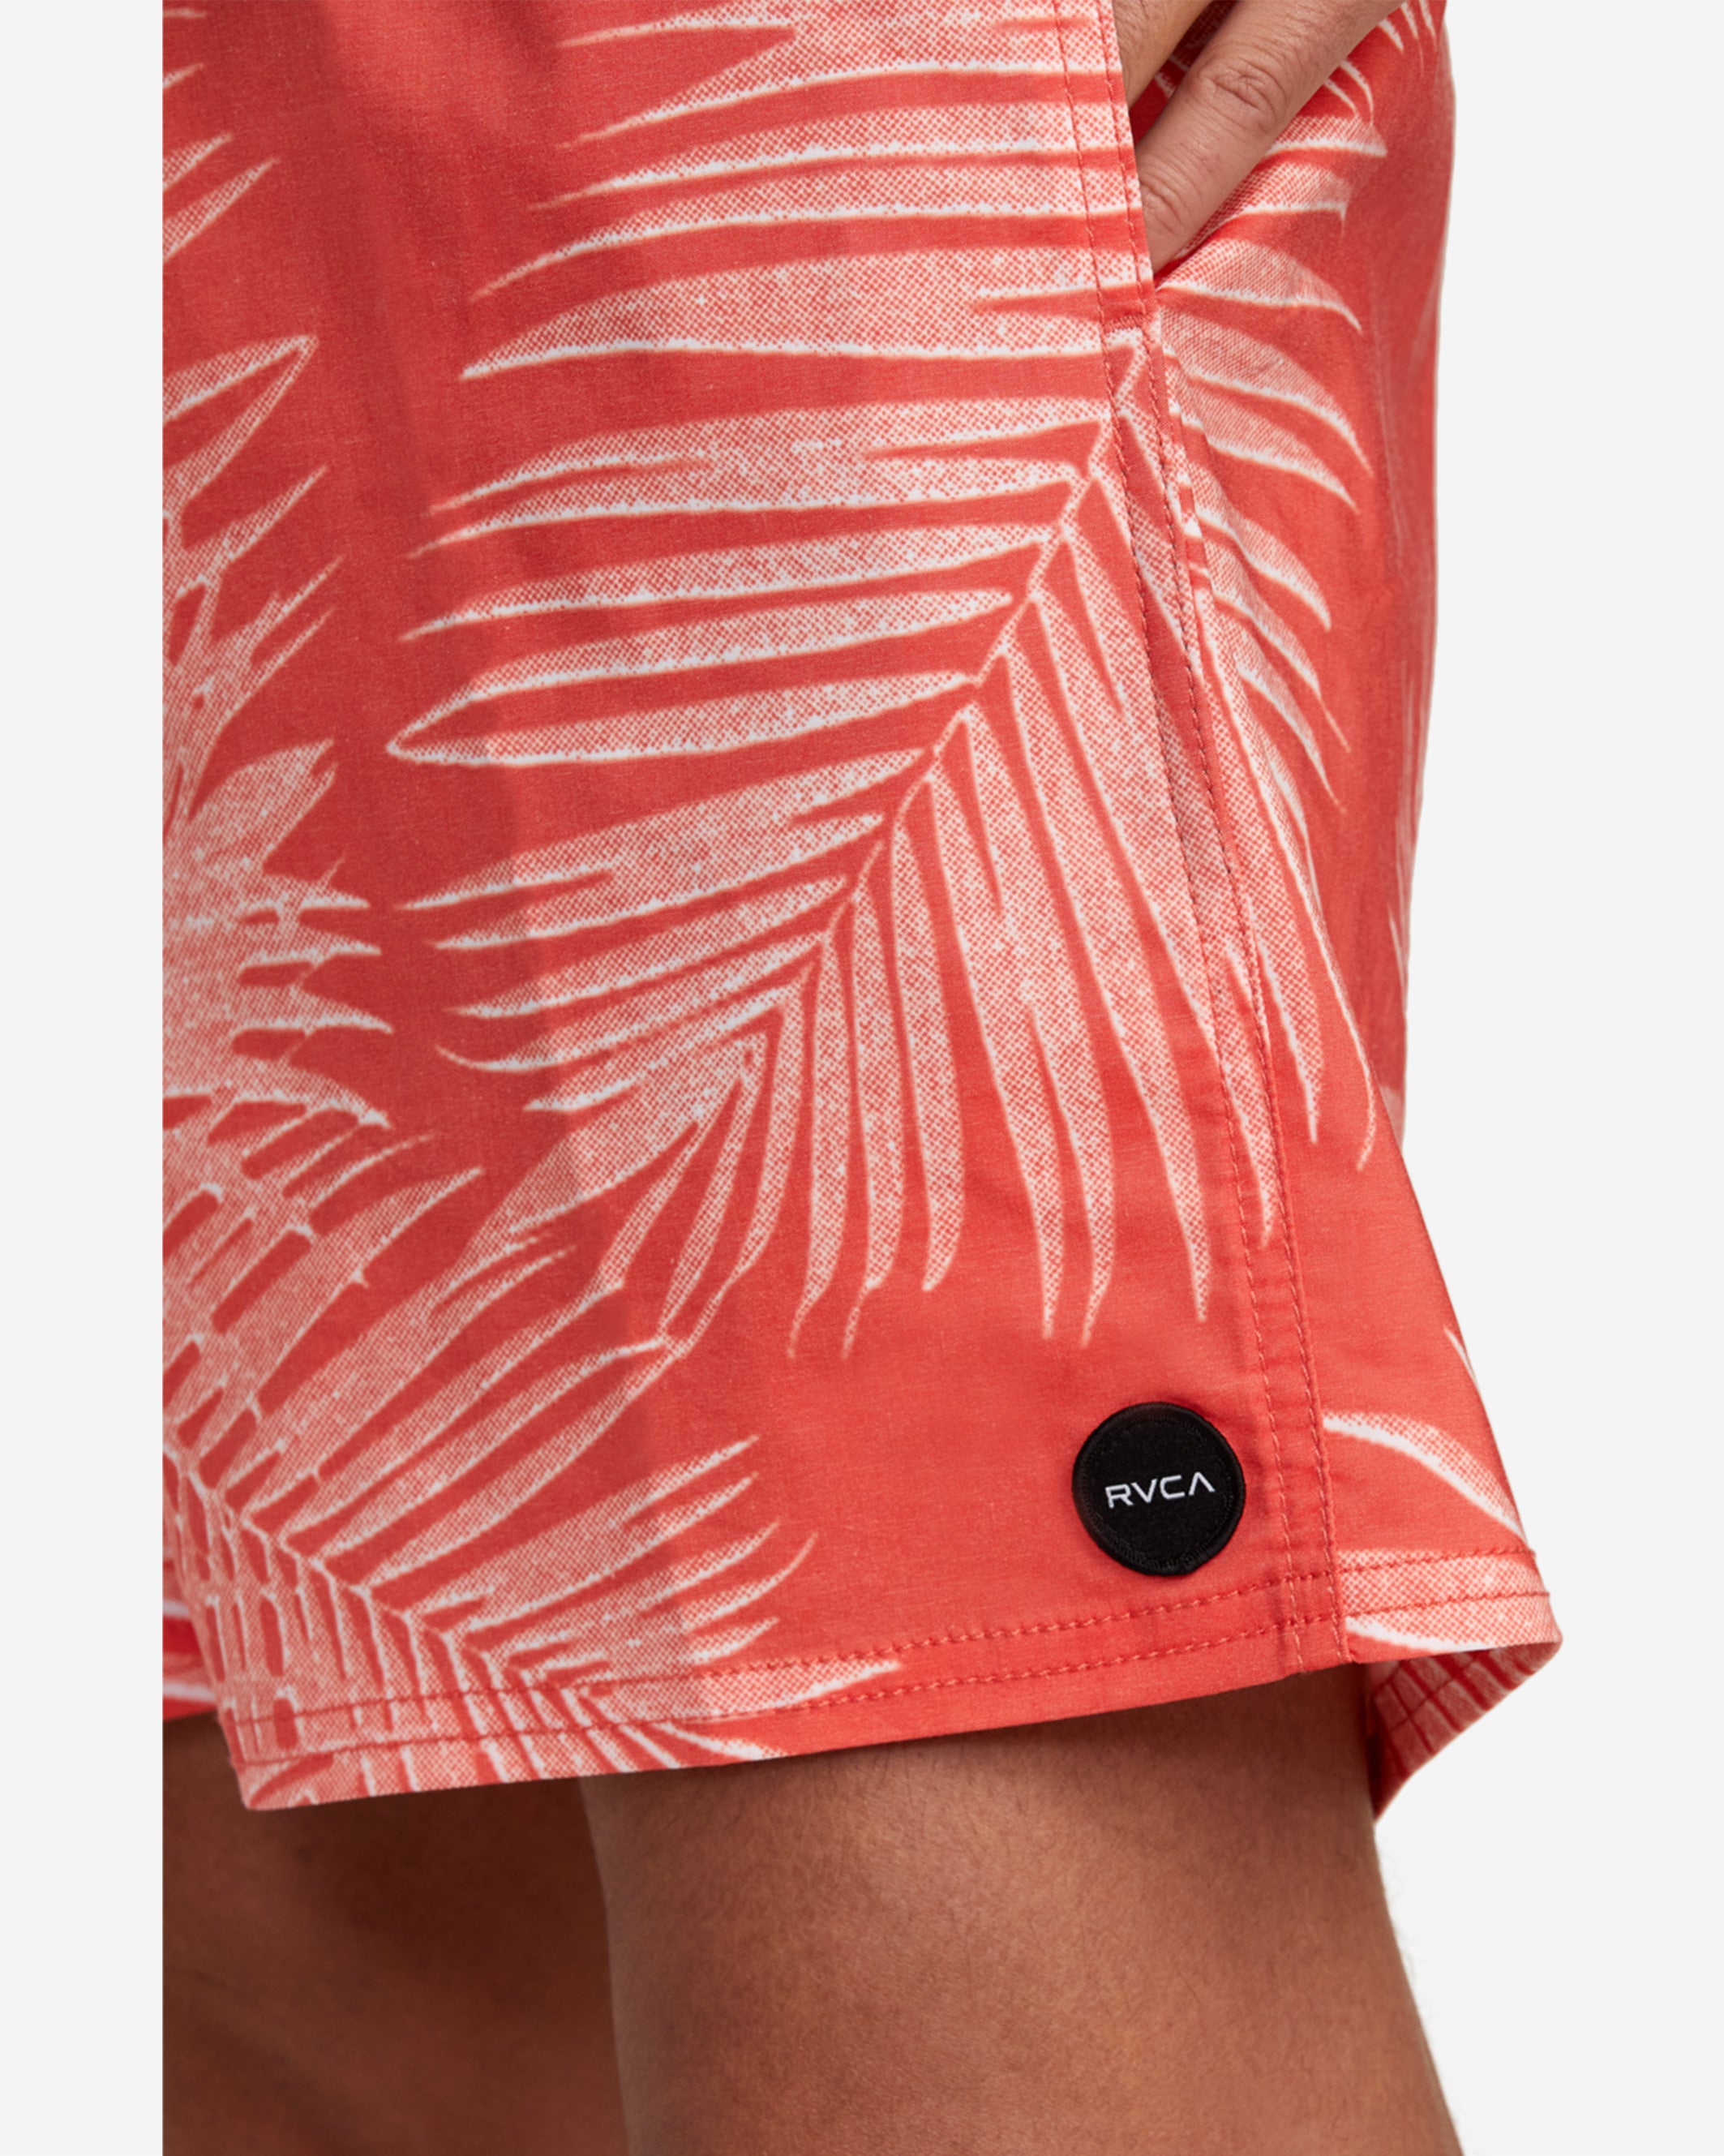 Sustainable style meets performance-enhancing fabrics in the RVCA Barnes Elastic Boardshorts 17". Featuring an allover bold print, these standout boardshorts offer an elastic drawcord waist, faux fly, pockets for your needs, triple needle stitching at the rise and RVCA logo branding throughout.